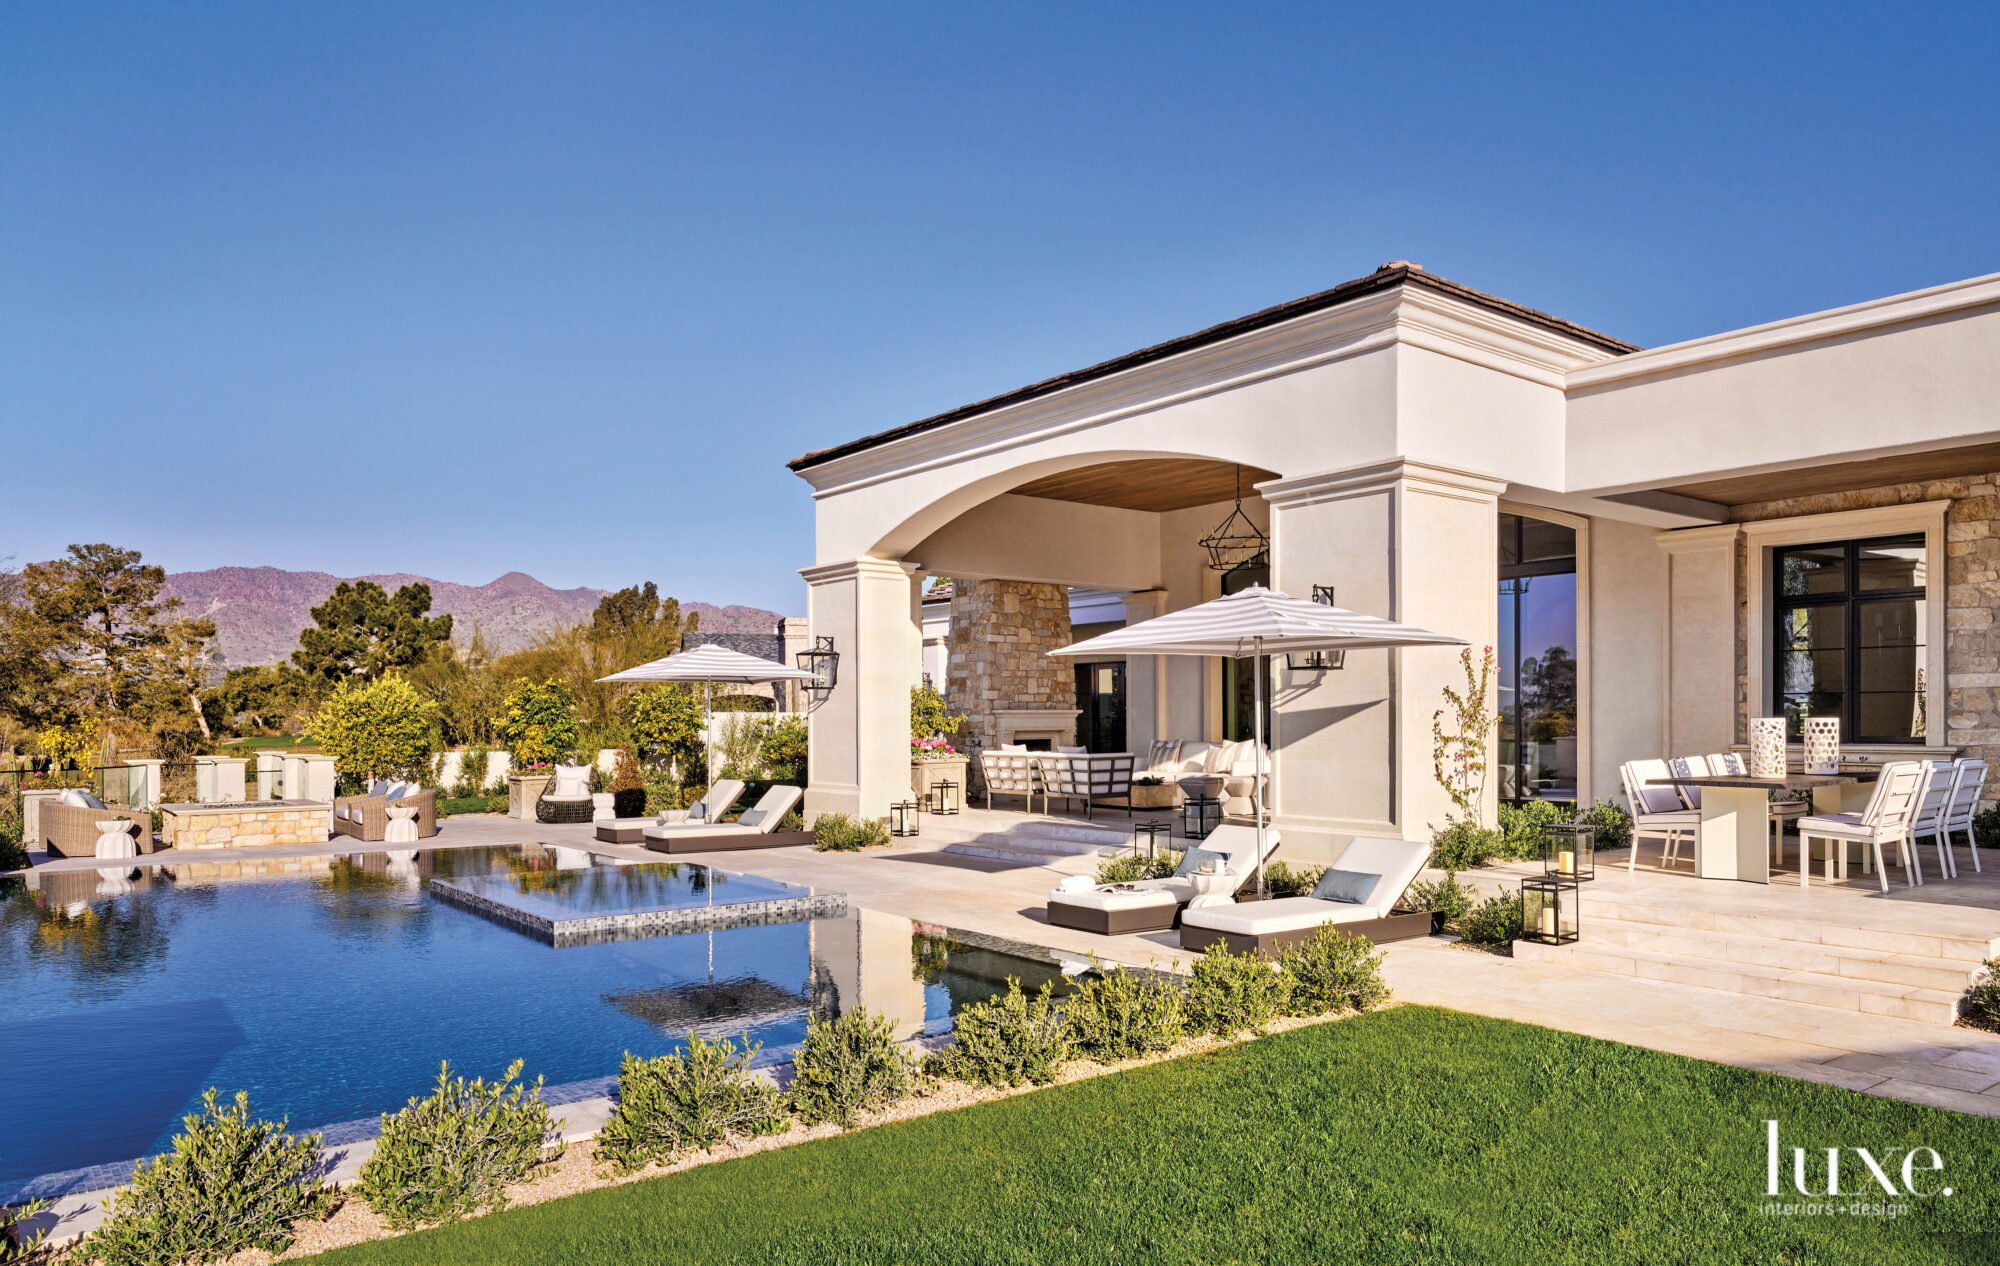 The backyard of the Mediterranean-style home which features a pool and plenty of entertaining areas.